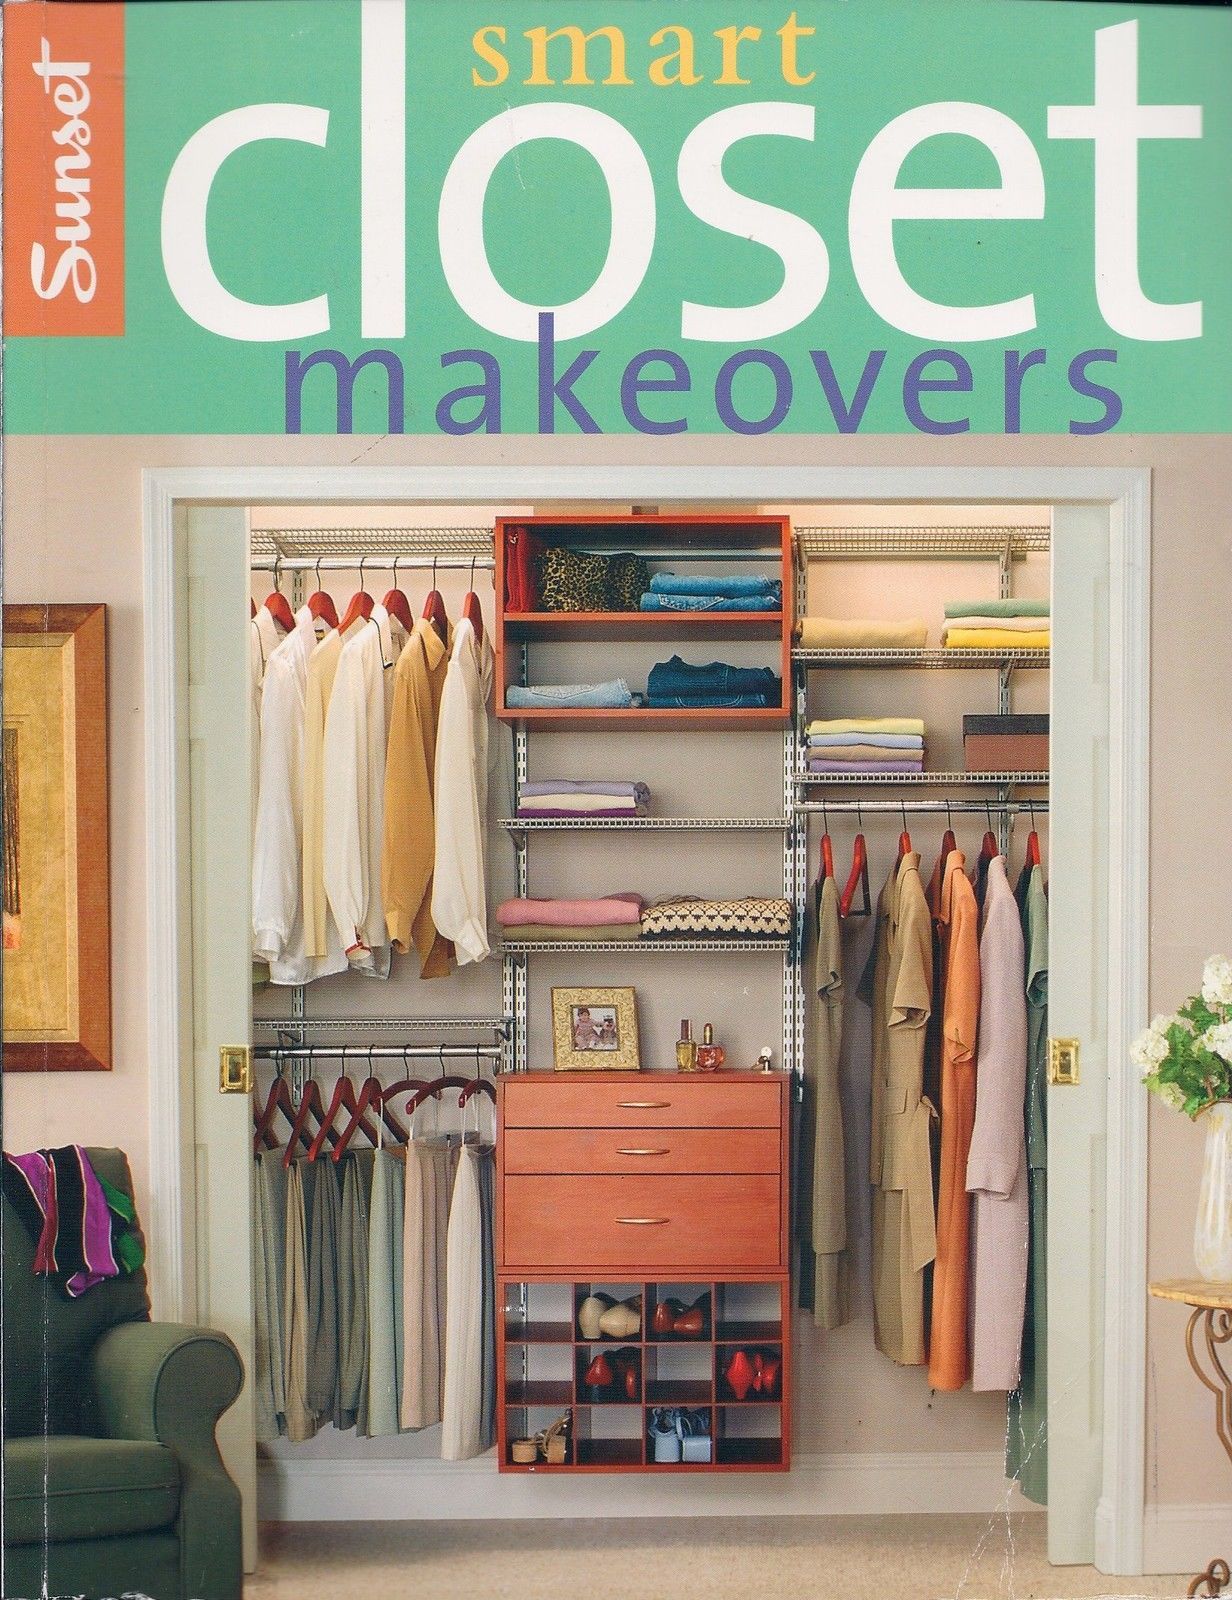 Primary image for Sunset Smart Closet Makeovers June 2006